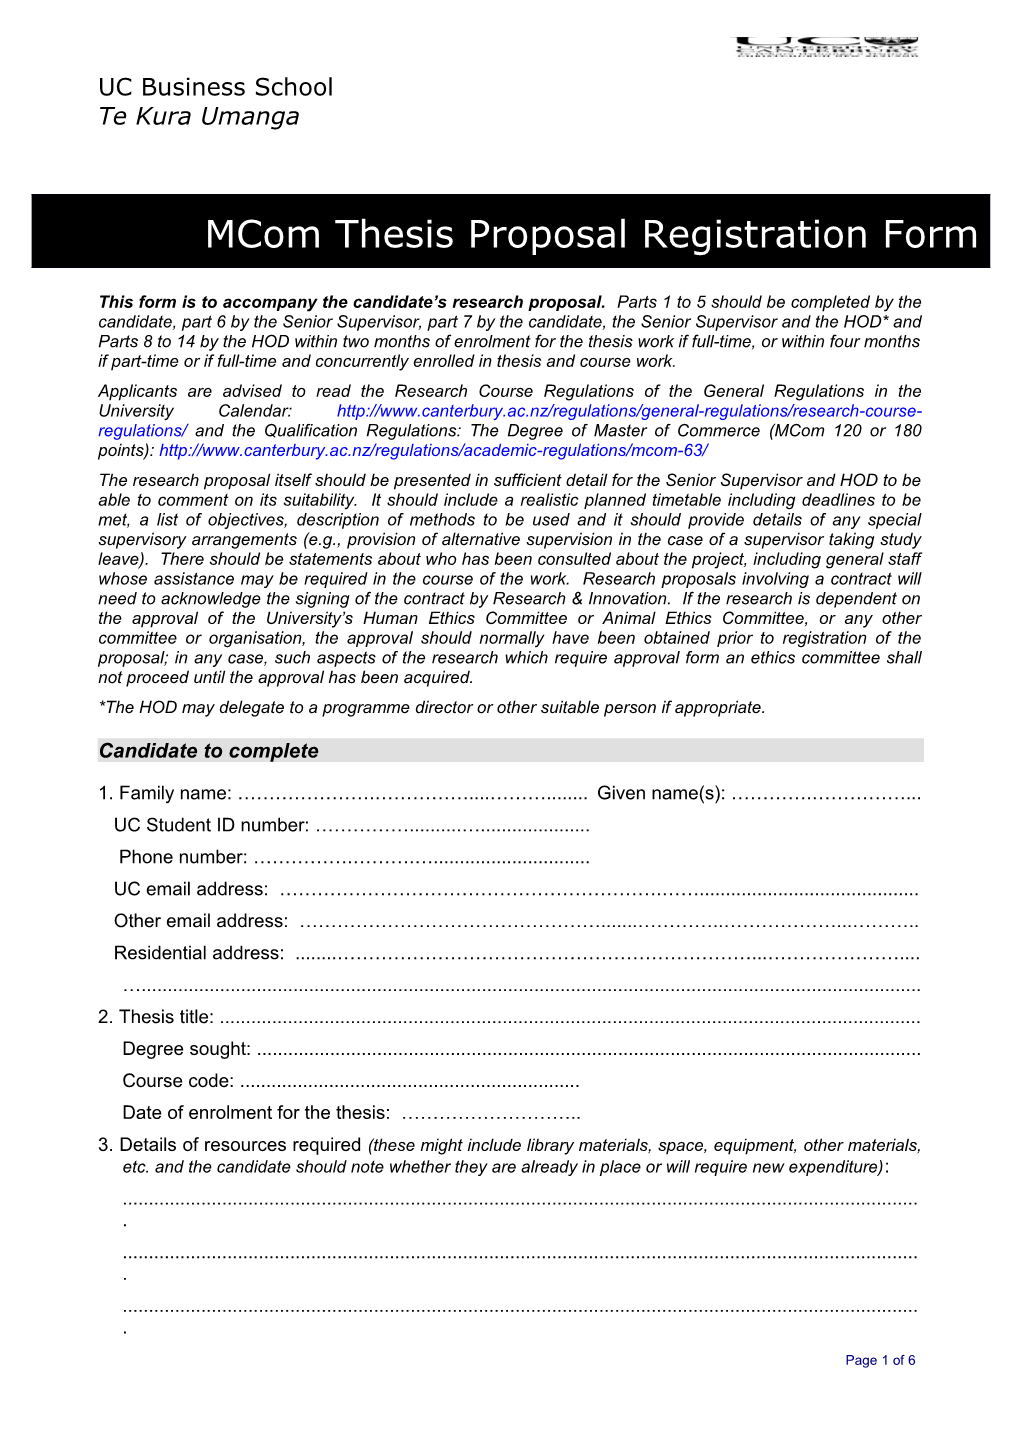 This Form Is to Accompany the Candidate S Research Proposal. Parts 1 to 5 Should Be Completed